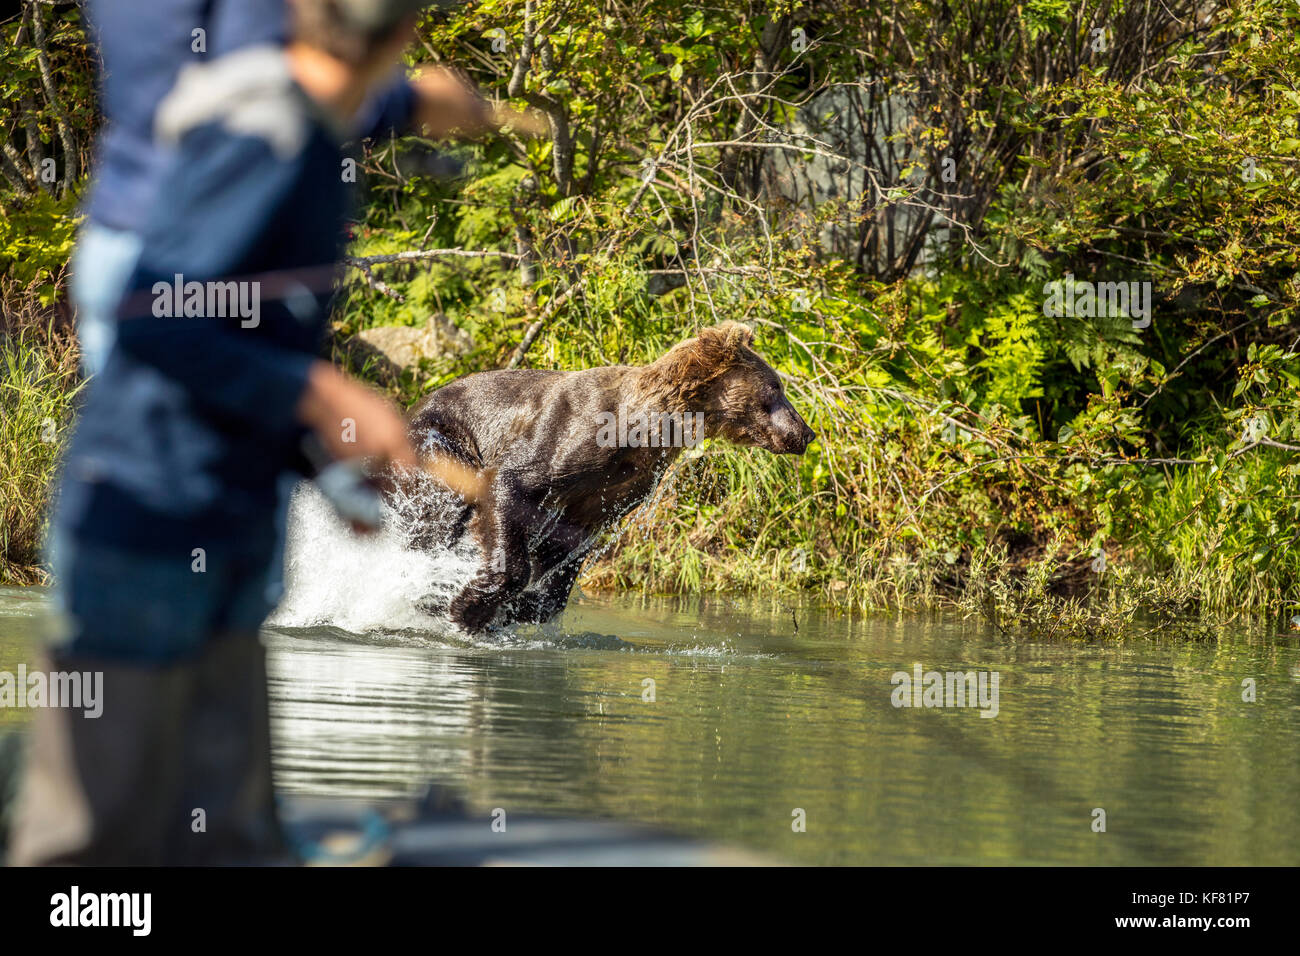 USA, Alaska, Redoubt Bay, Big River Lake, a brown grizzly bear catching fish in the waters near Wolverine Cove Stock Photo